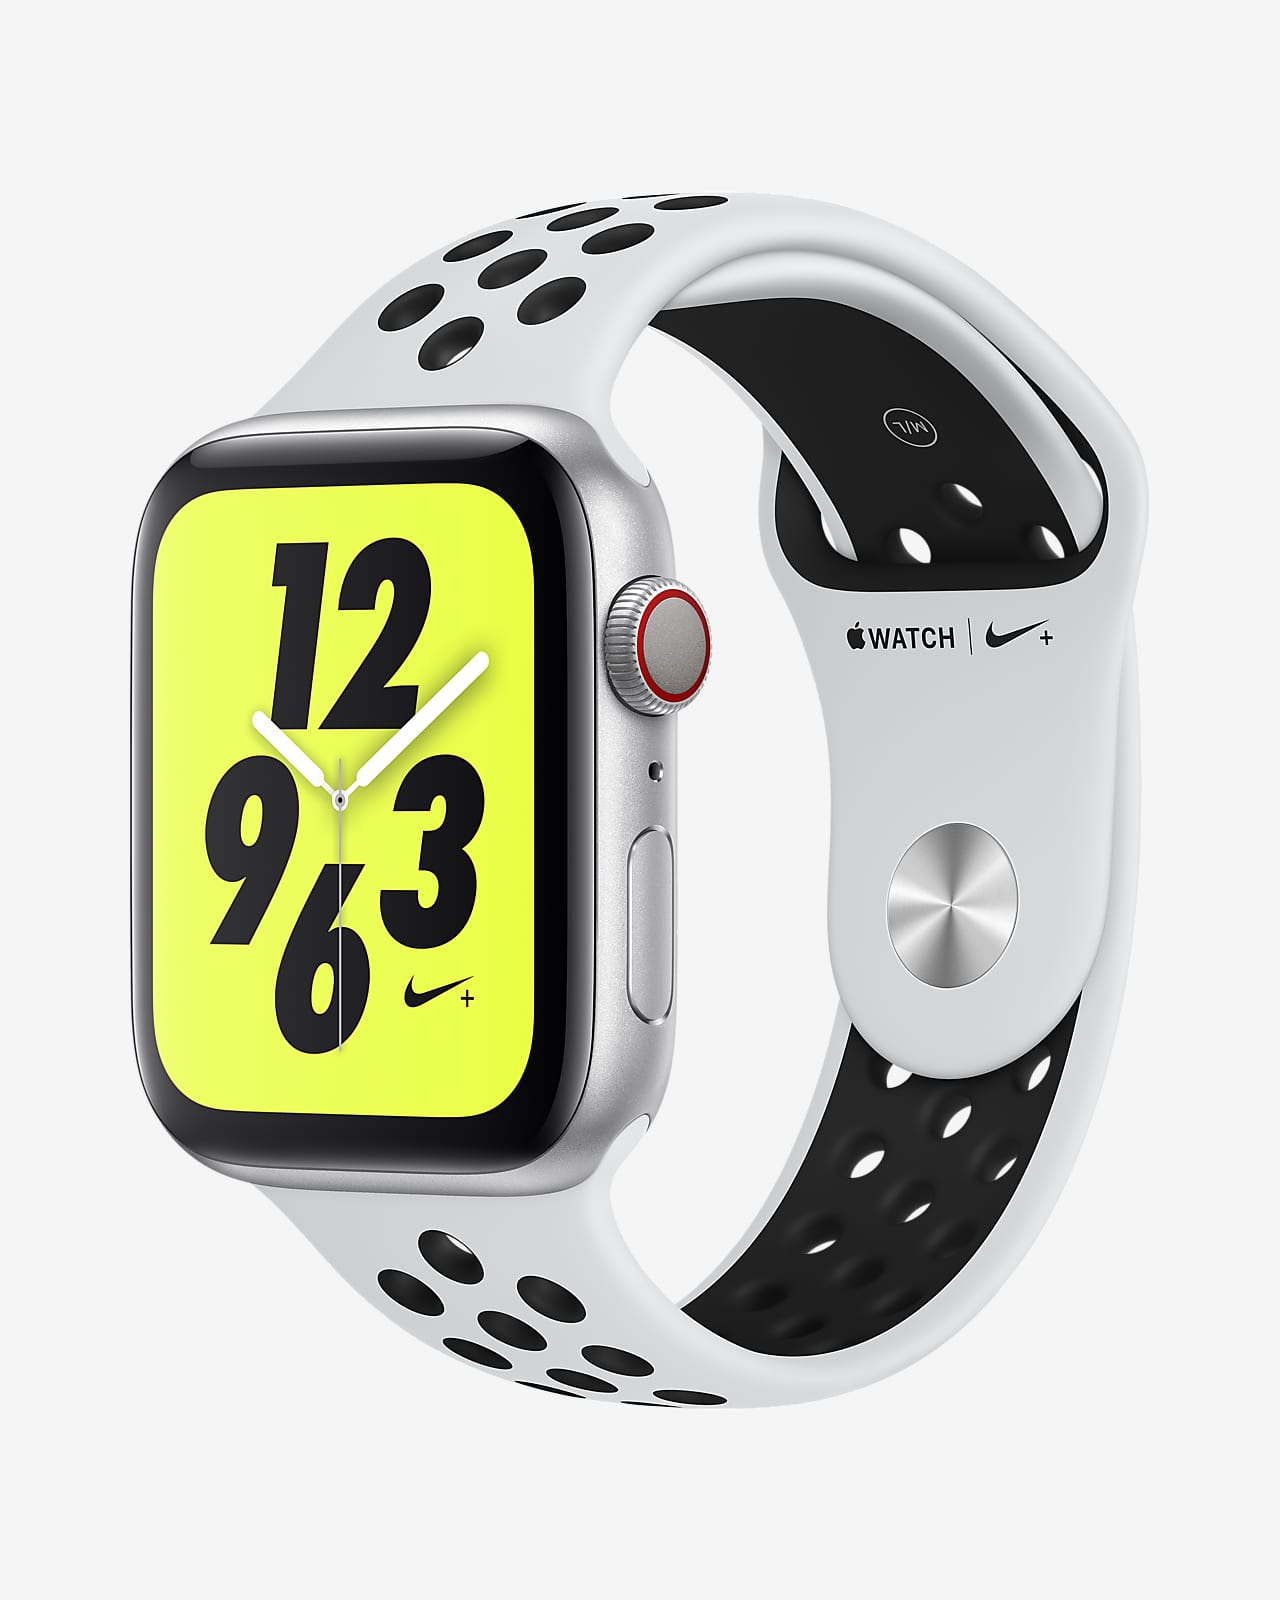 Apple Series 4 + Cellular) with Nike Sport Band Open Box 44mm Sport Watch. Nike